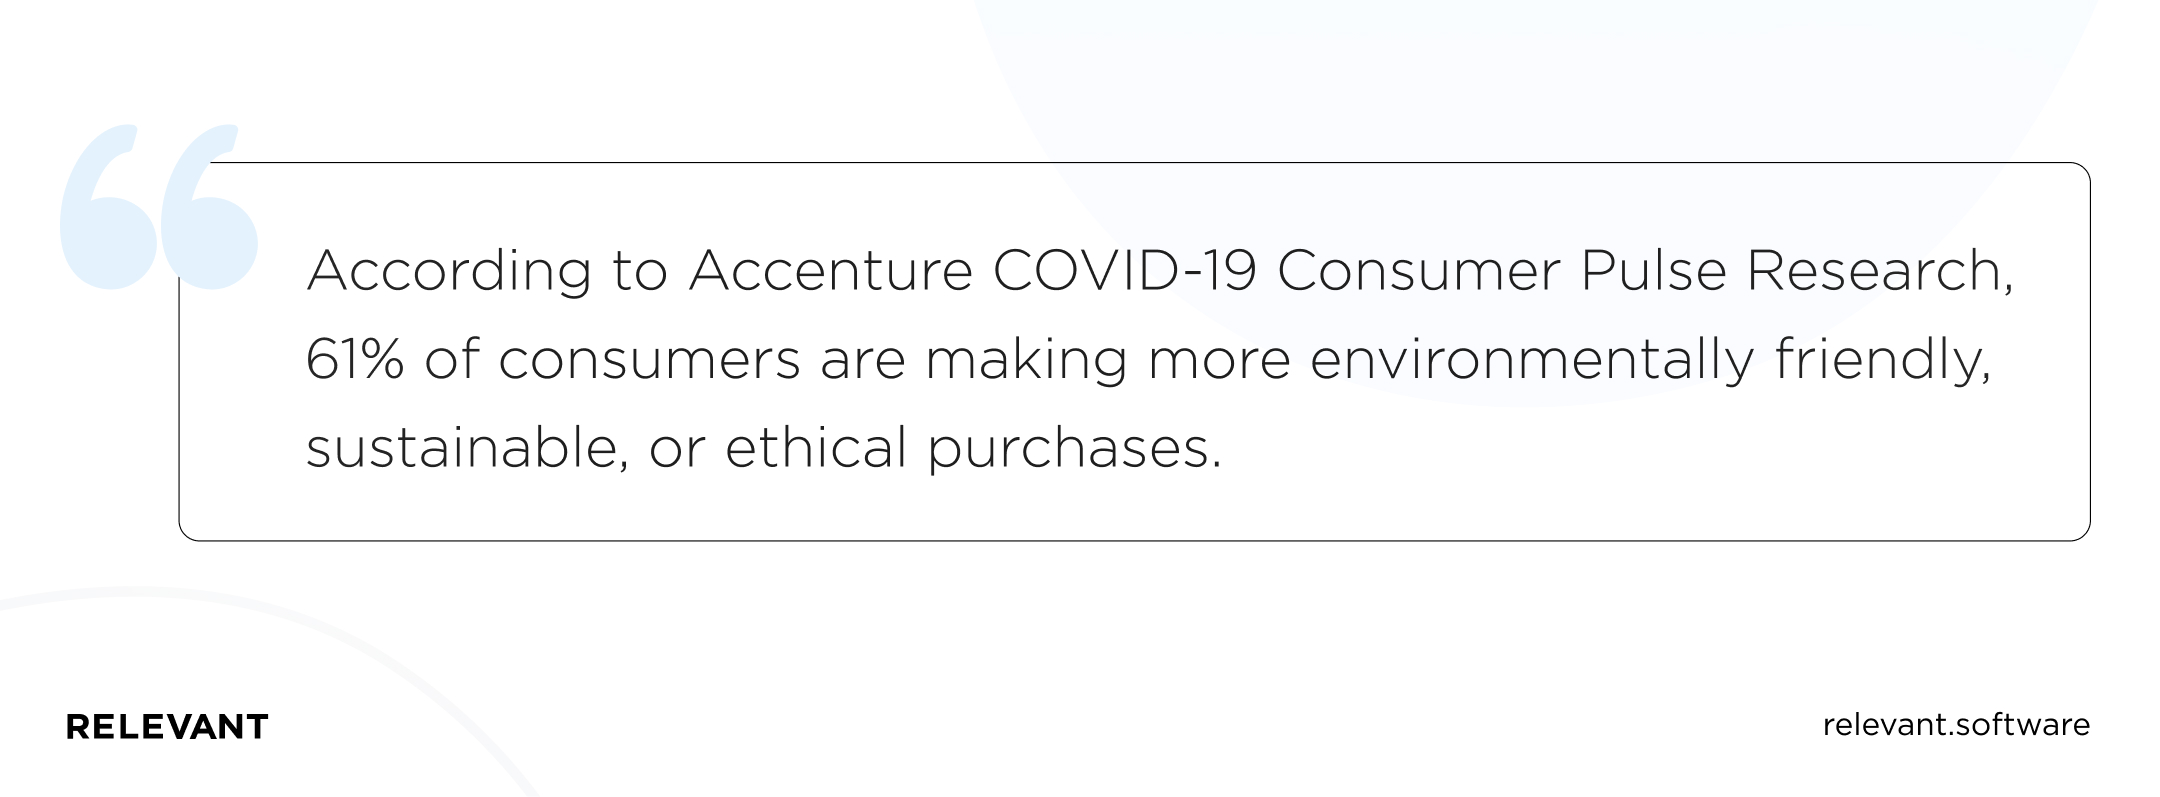 According to Accenture COVID-19 Consumer Pulse Research, 61% of consumers are making more environmentally friendly, sustainable, or ethical purchases.